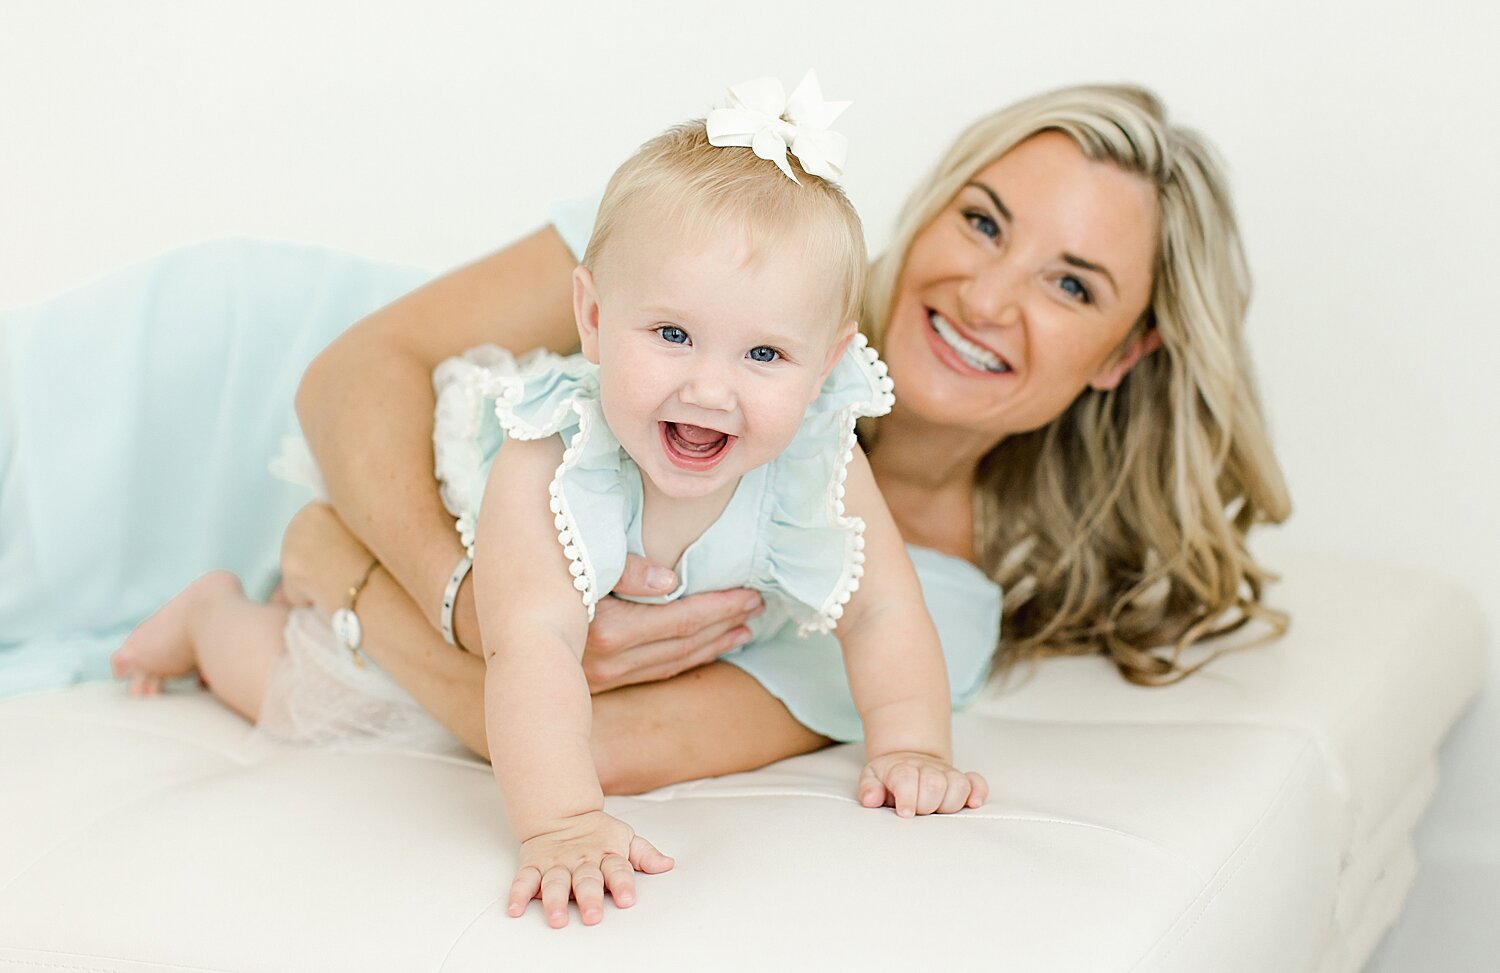 Mommy and me session with 8 month old baby girl. Photos by Kristin Wood Photography.